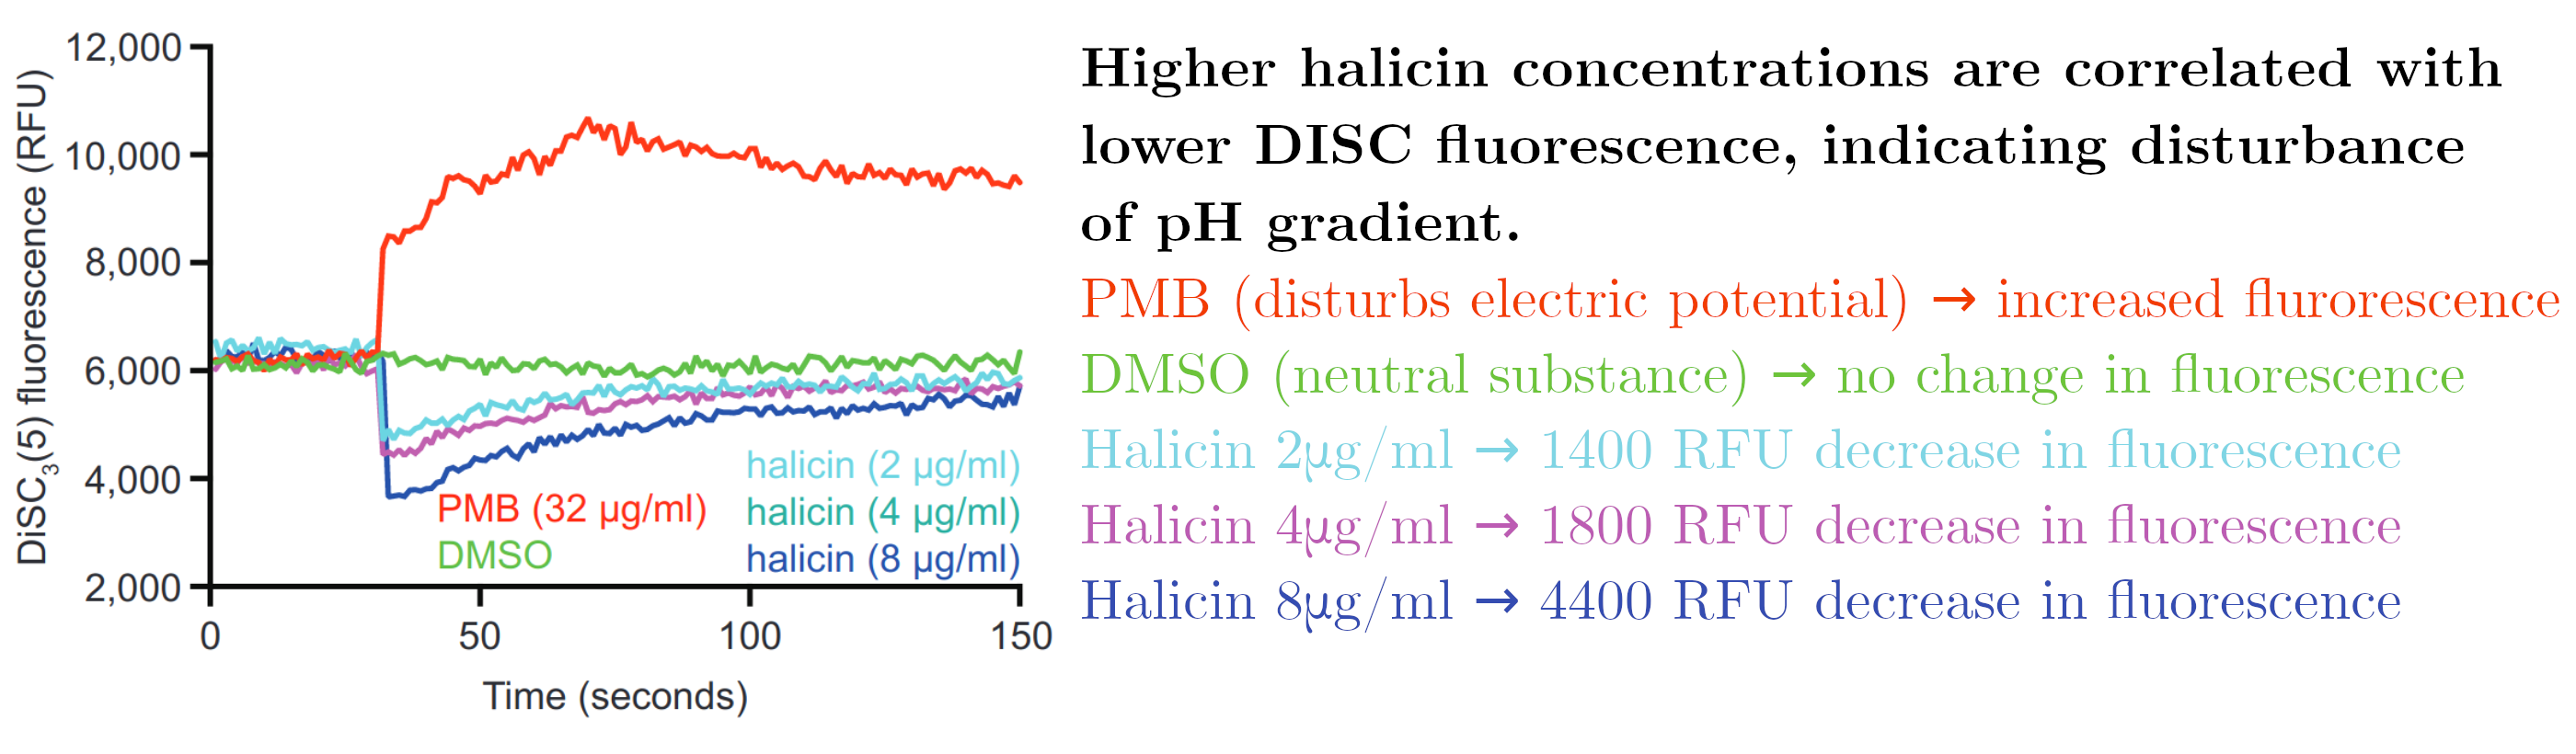 Higher halicin concentrations are correlated with lower DISC fluoresence, indidating disturbance of pH gradient. // PMB (disturbs electric potential) -> increased fluorescence. // DMSO (neutral substance) -> no change in fluorescence. // Halicin 2 ug/ml -> 1400 RFU decrease in fluorescence. // Halicin 4 ug/ml -> 1800 RFU decrease in fluorescence. // Halicin 8 ug/ml -> 4400 RFU decrease in fluorescence.